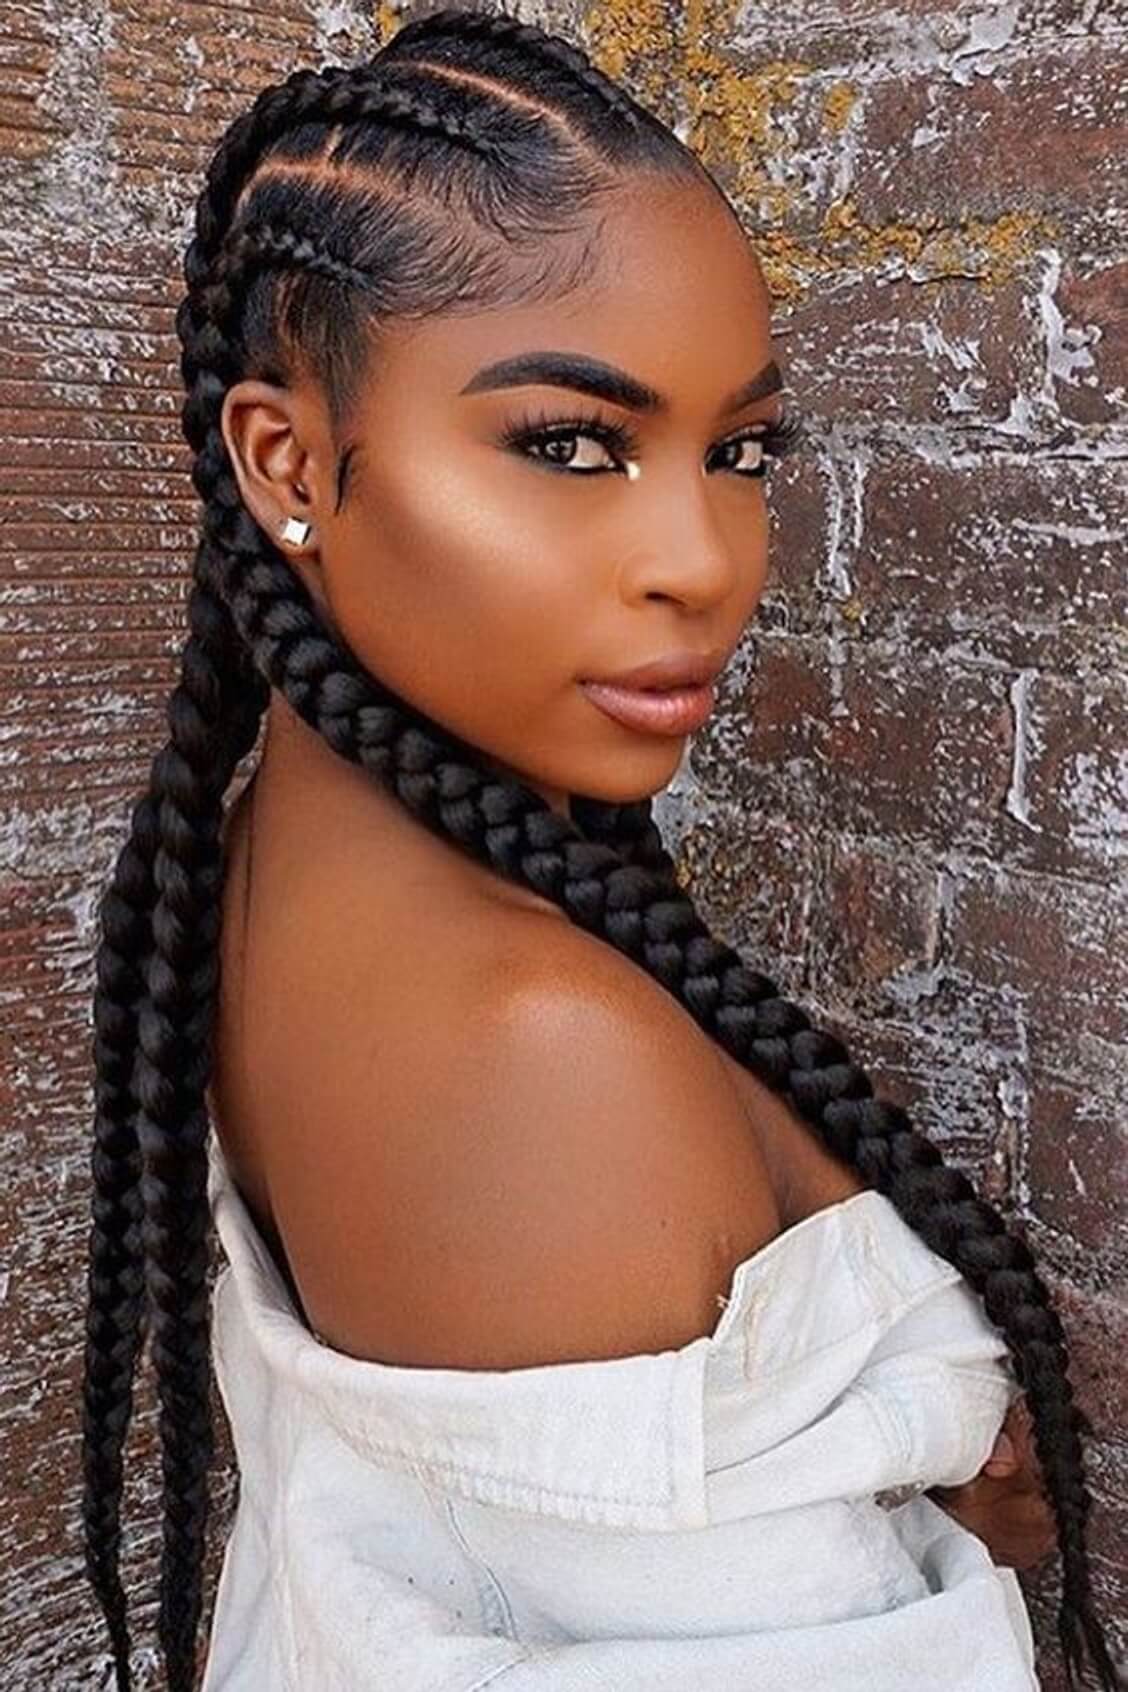 50 Trendy Braided Hairstyles To Instantly Glam Up Your Look - 365